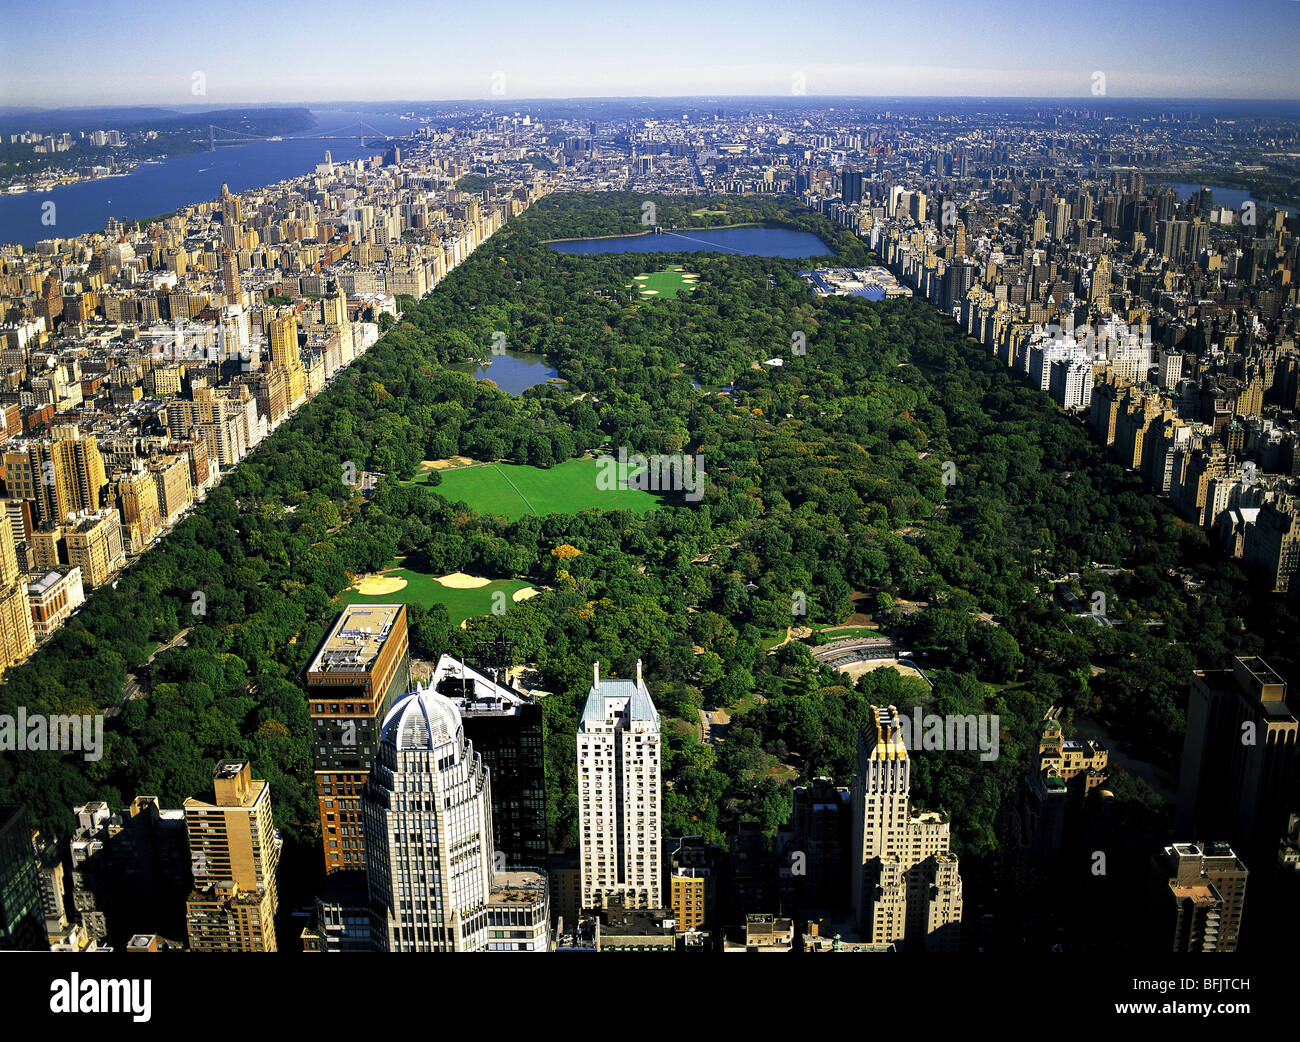 How Big Is Central Park In New York City - Best Design Idea